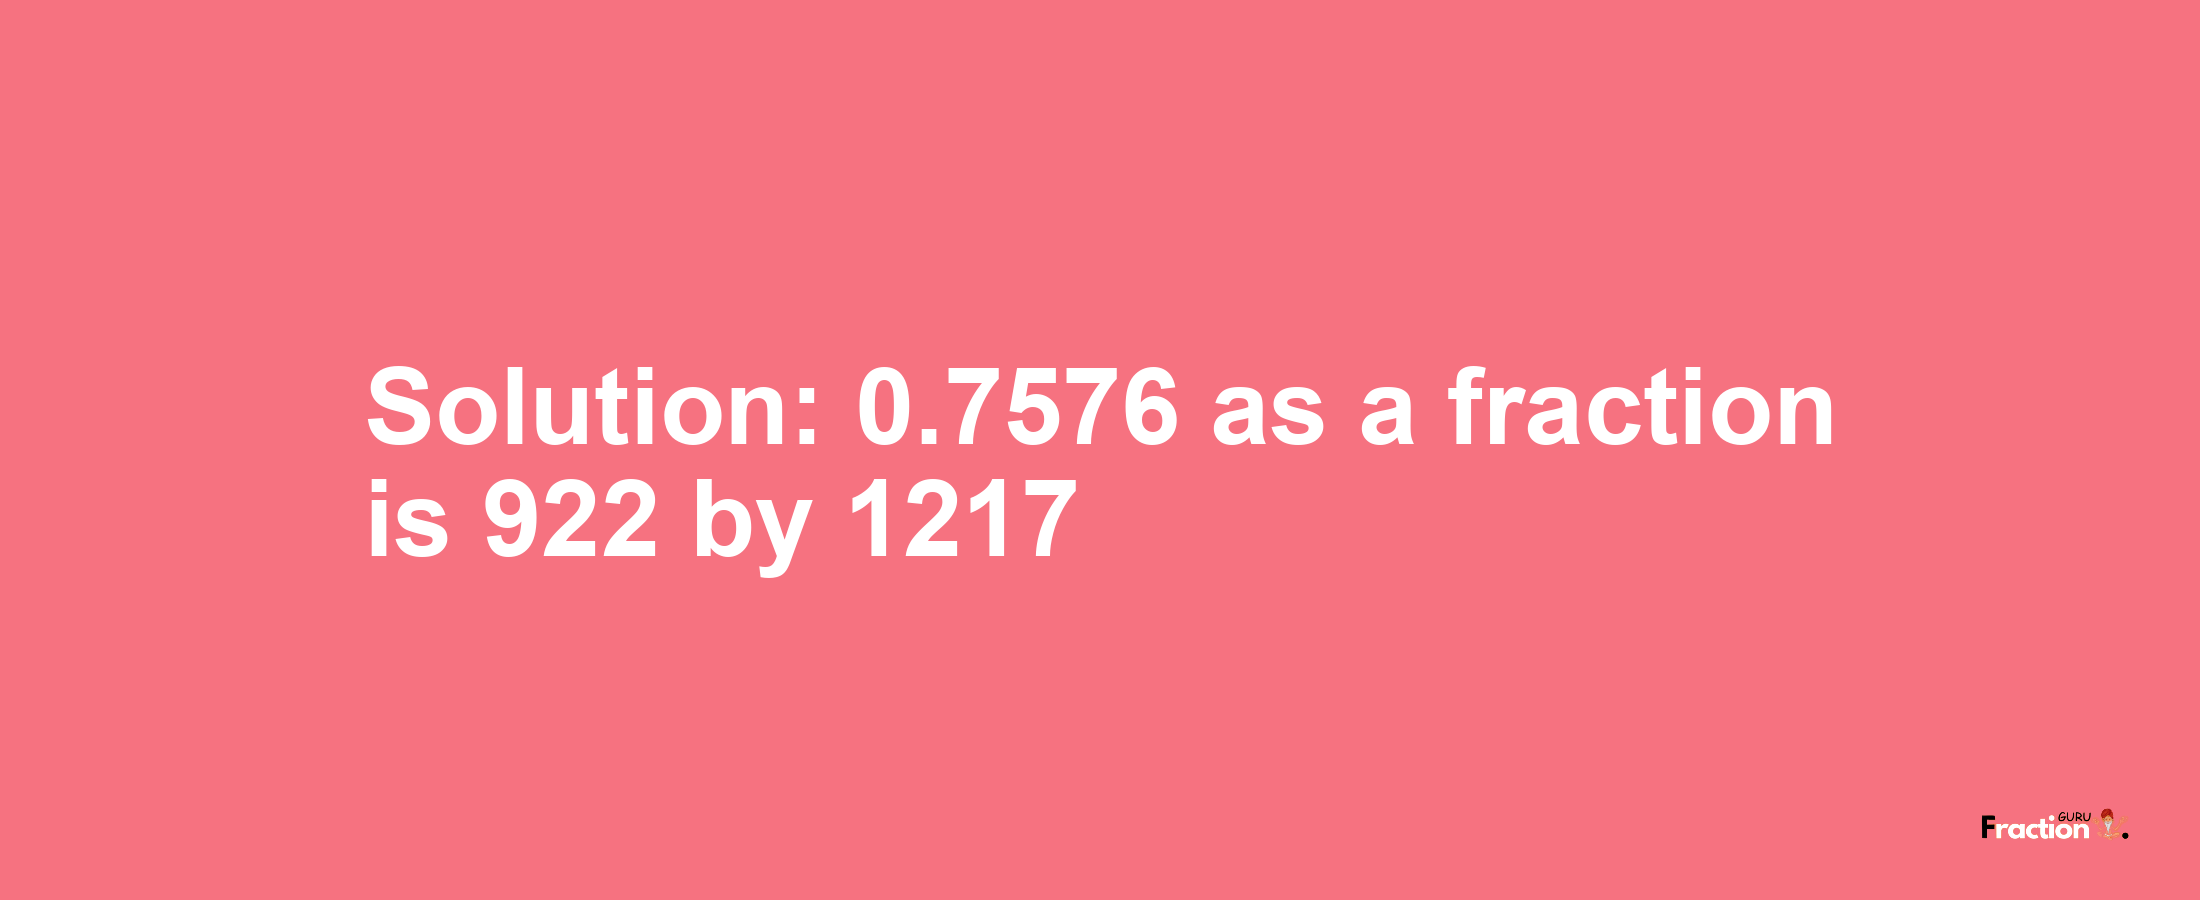 Solution:0.7576 as a fraction is 922/1217